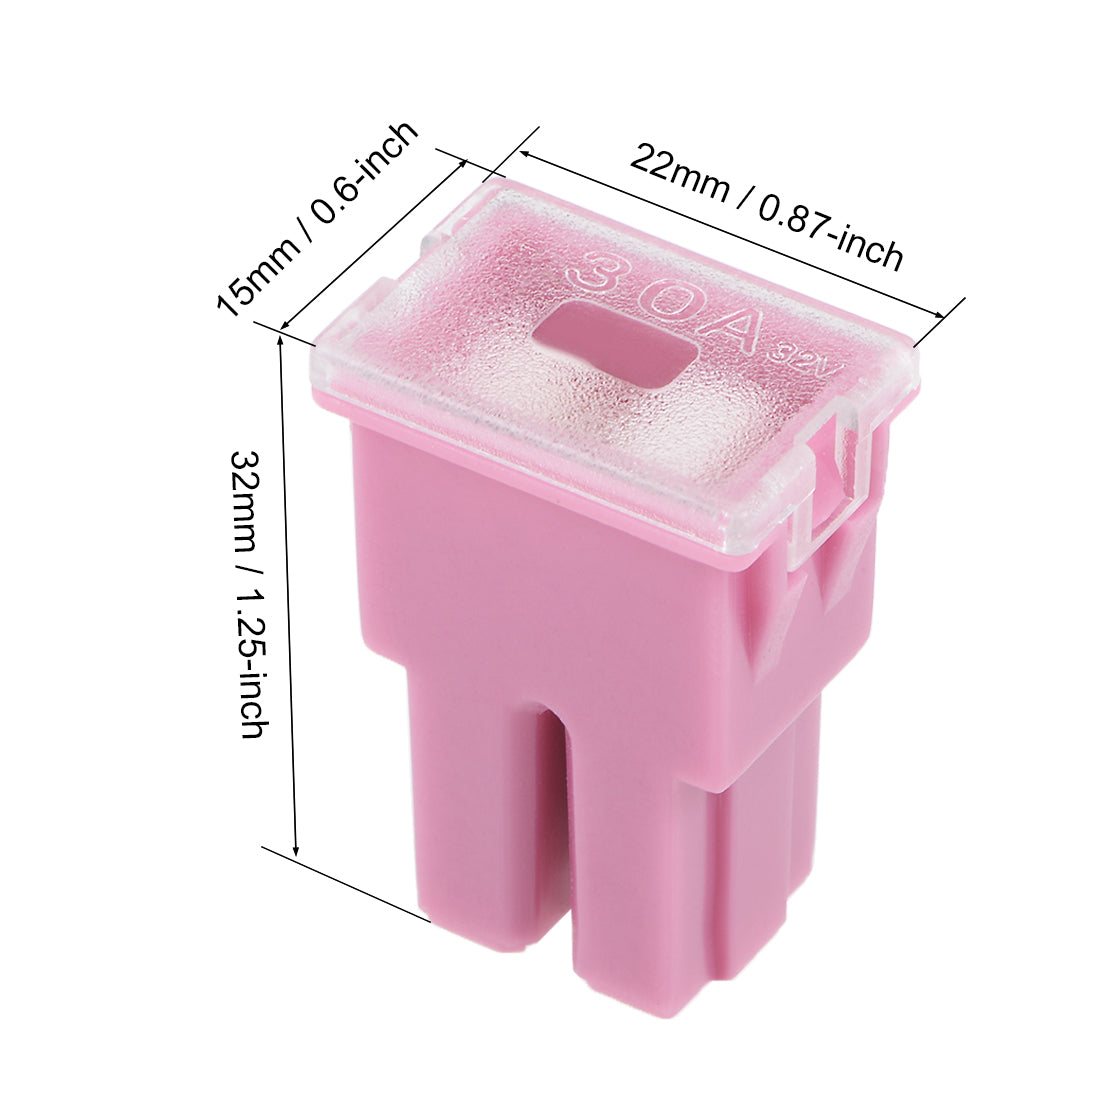 uxcell Uxcell Automotive Mini Cartridge Fuse 32V 30A Female J Case Box for Car Truck SUV Vehicle